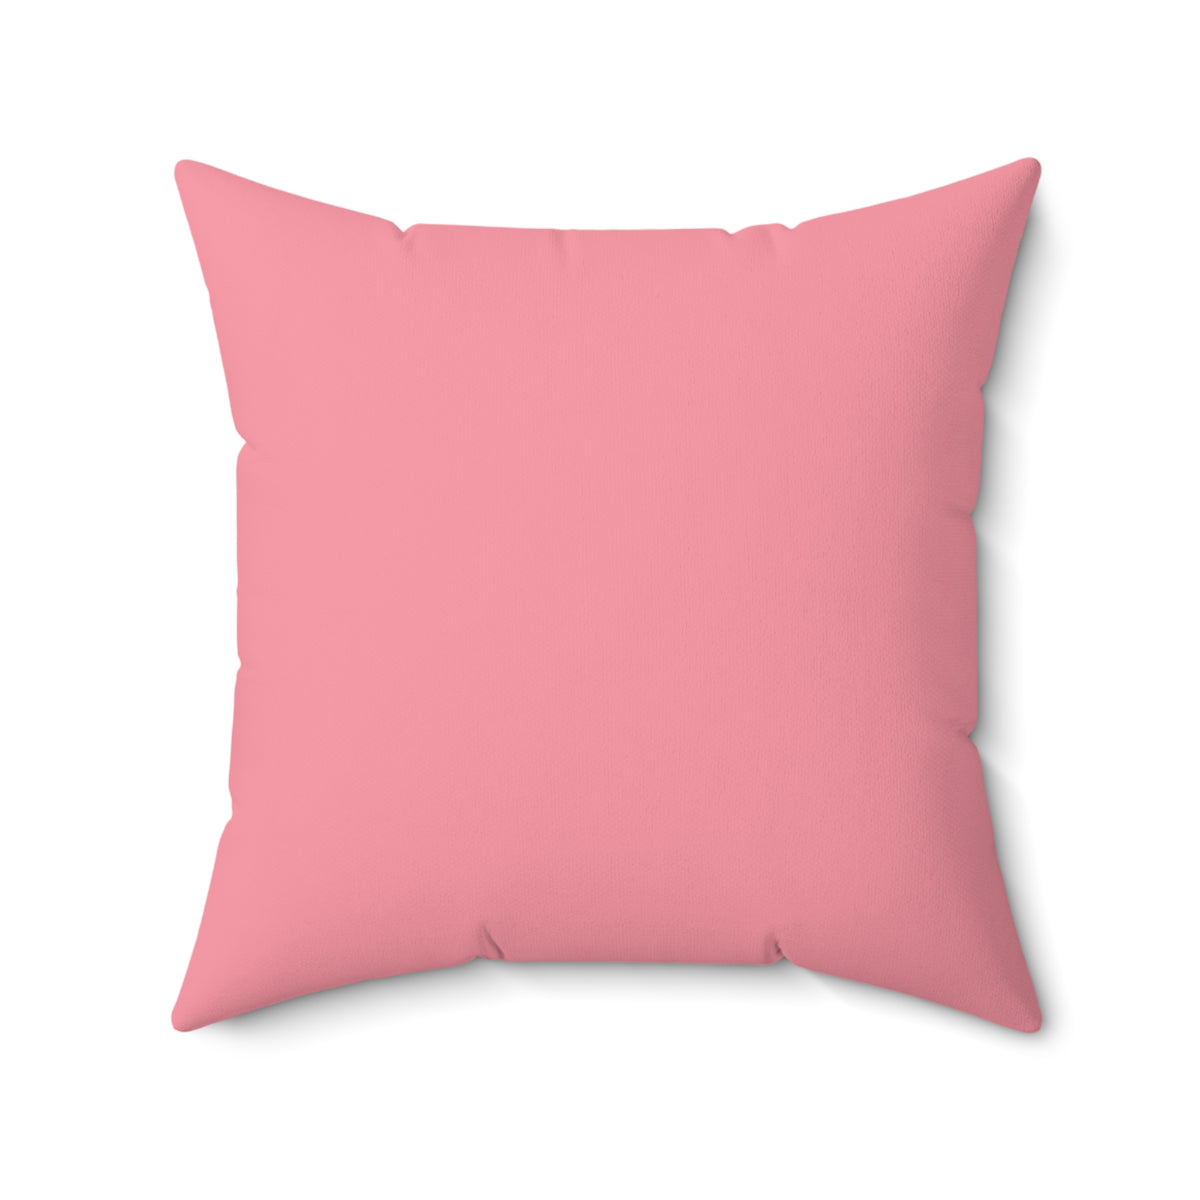 Retro Pink Ornaments Christmas Pillow | Beautiful Christmas Home Decor | Christmas Gift For Her | Faux Suede Square Pillow